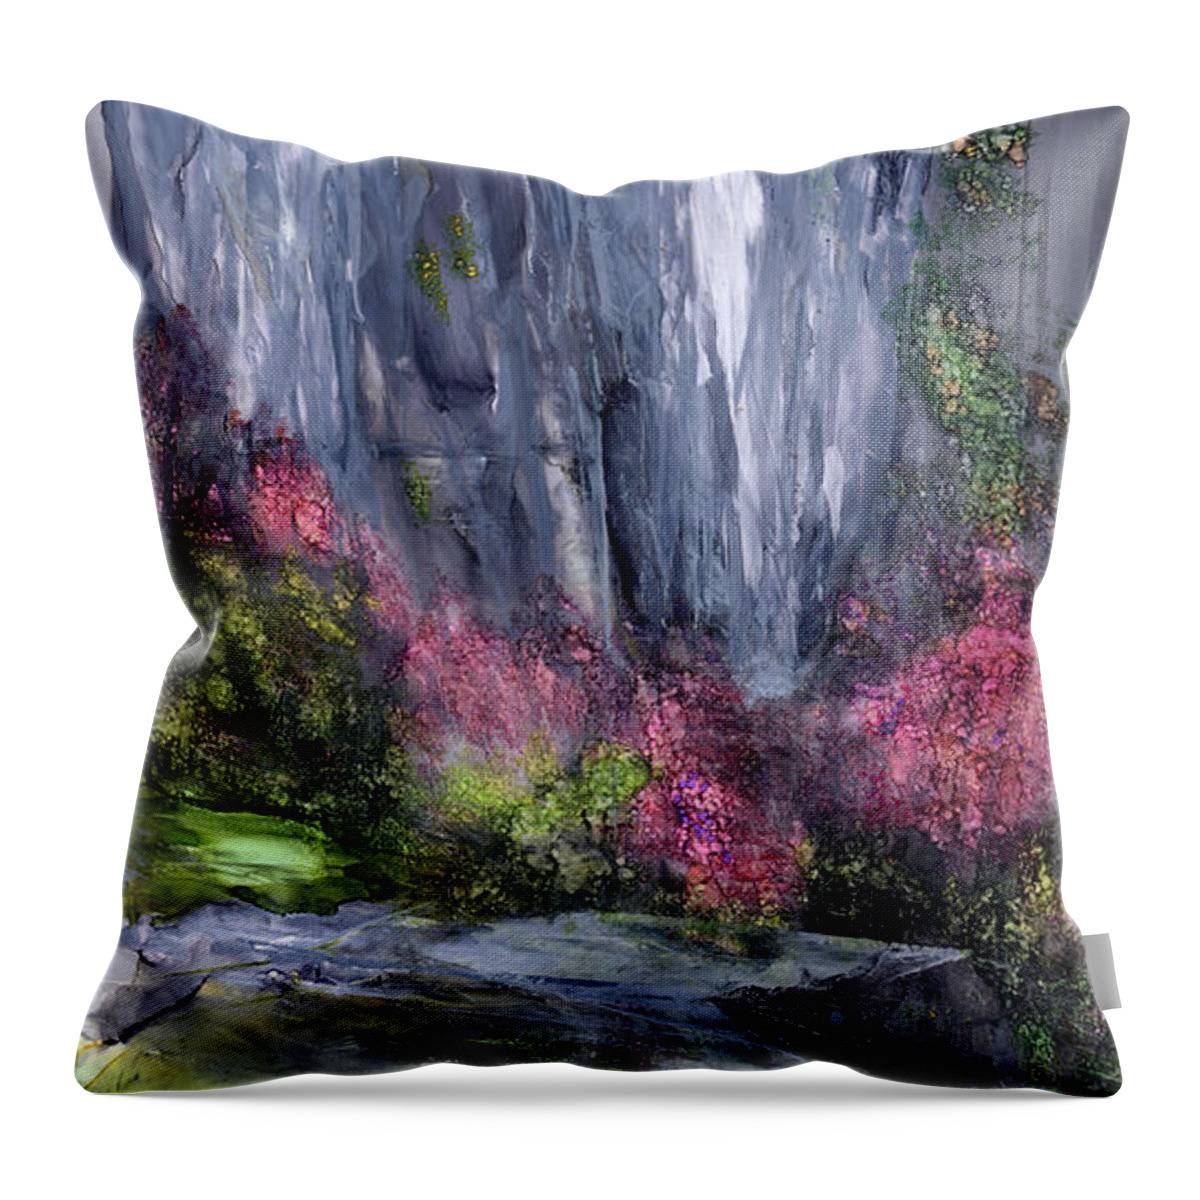 Abstract Landscape Throw Pillow featuring the painting Emerald Grotto by Charlene Fuhrman-Schulz